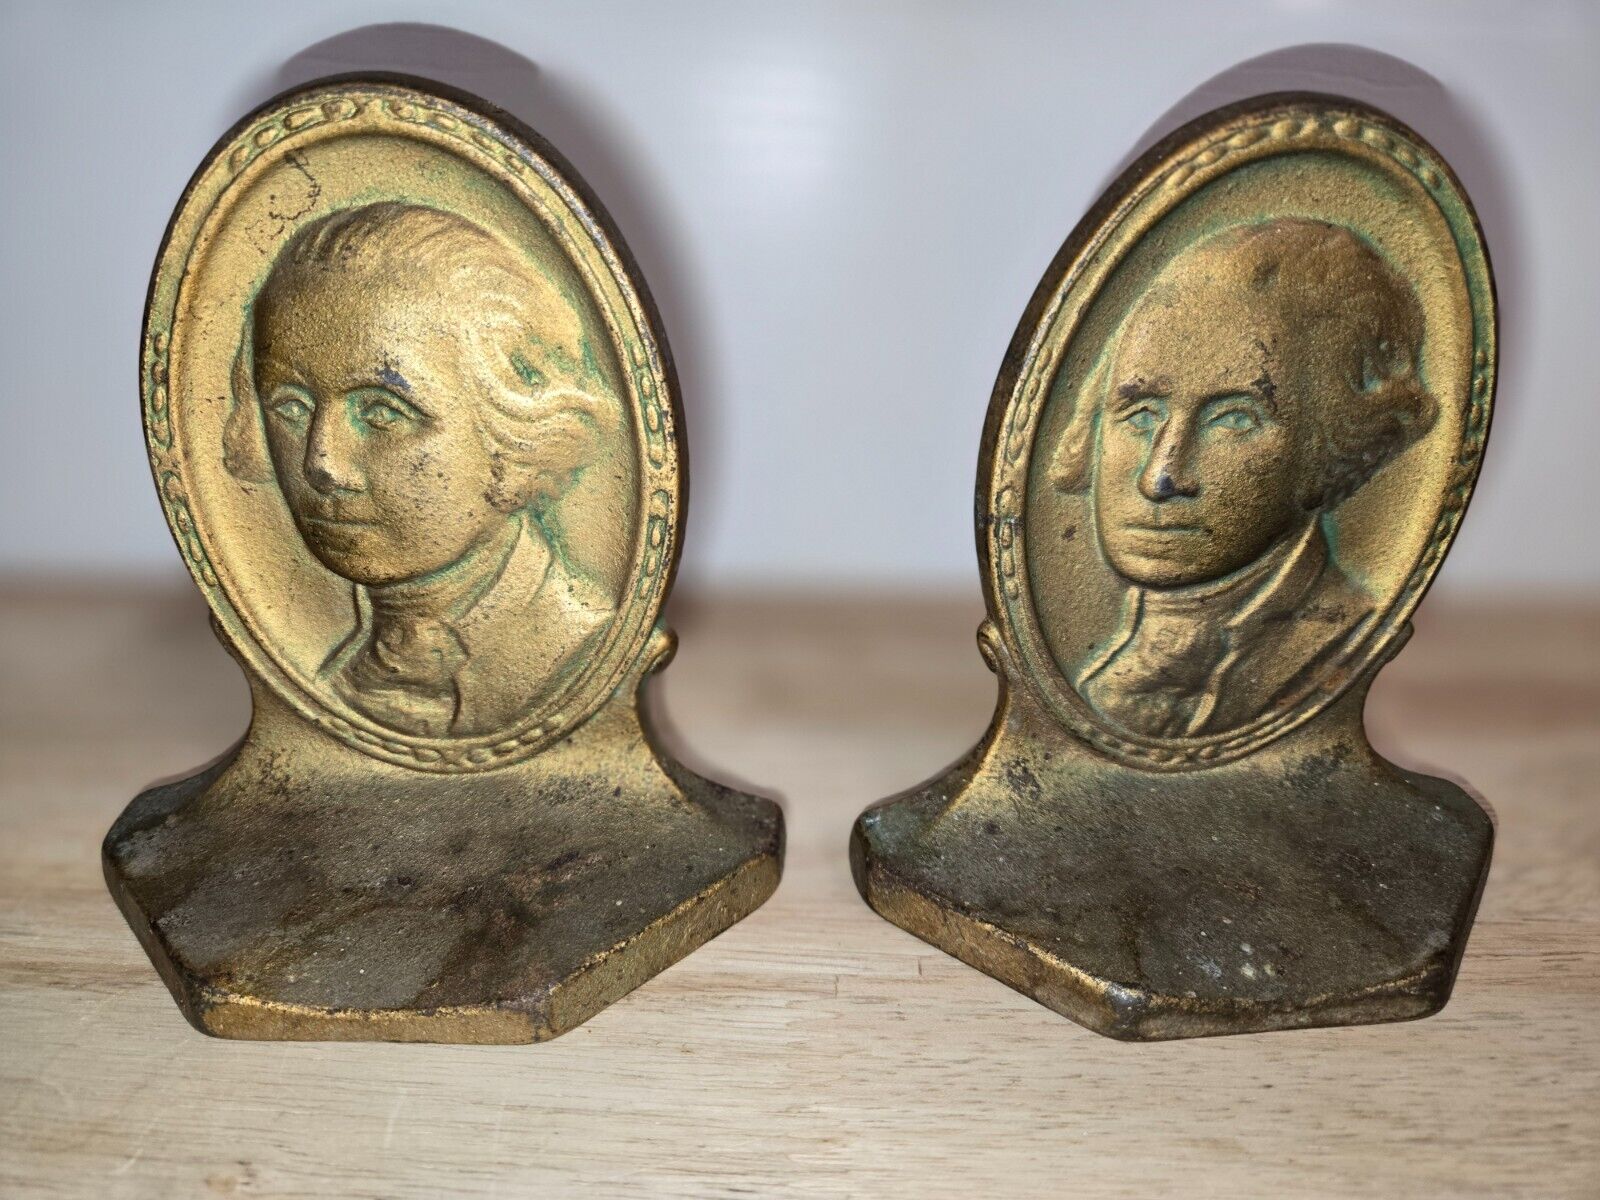 VTG 1928 COPR GOLD TONED CAST IRON GEORGE WASHINGTON BOOK ENDS GREEN PATINA